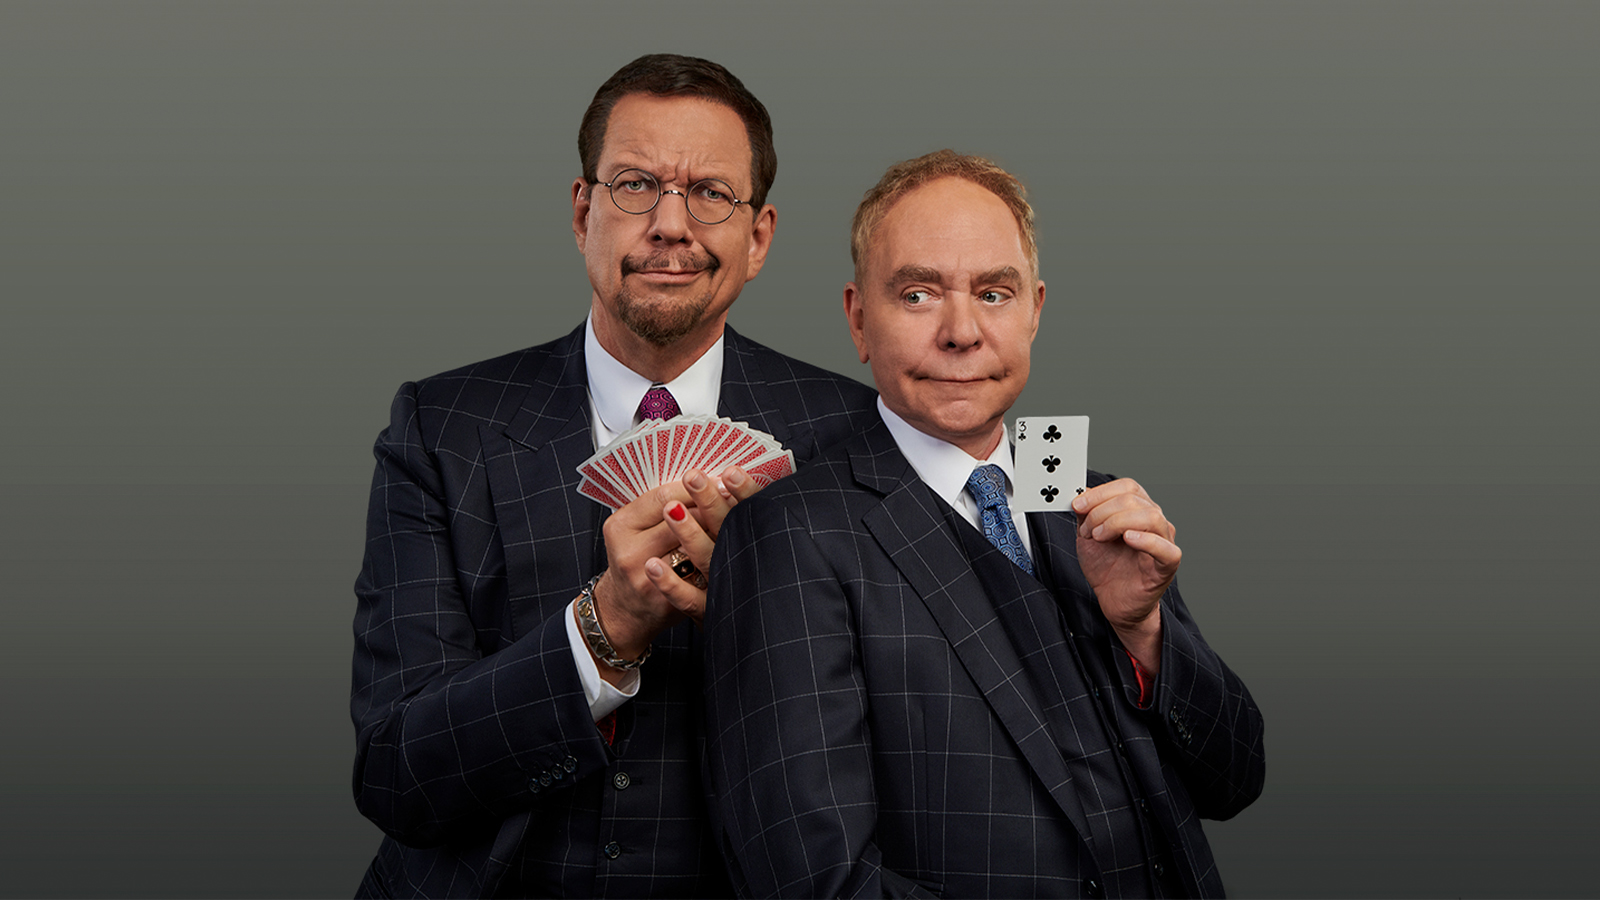 Two men in suit holding play cards, make funny faces.